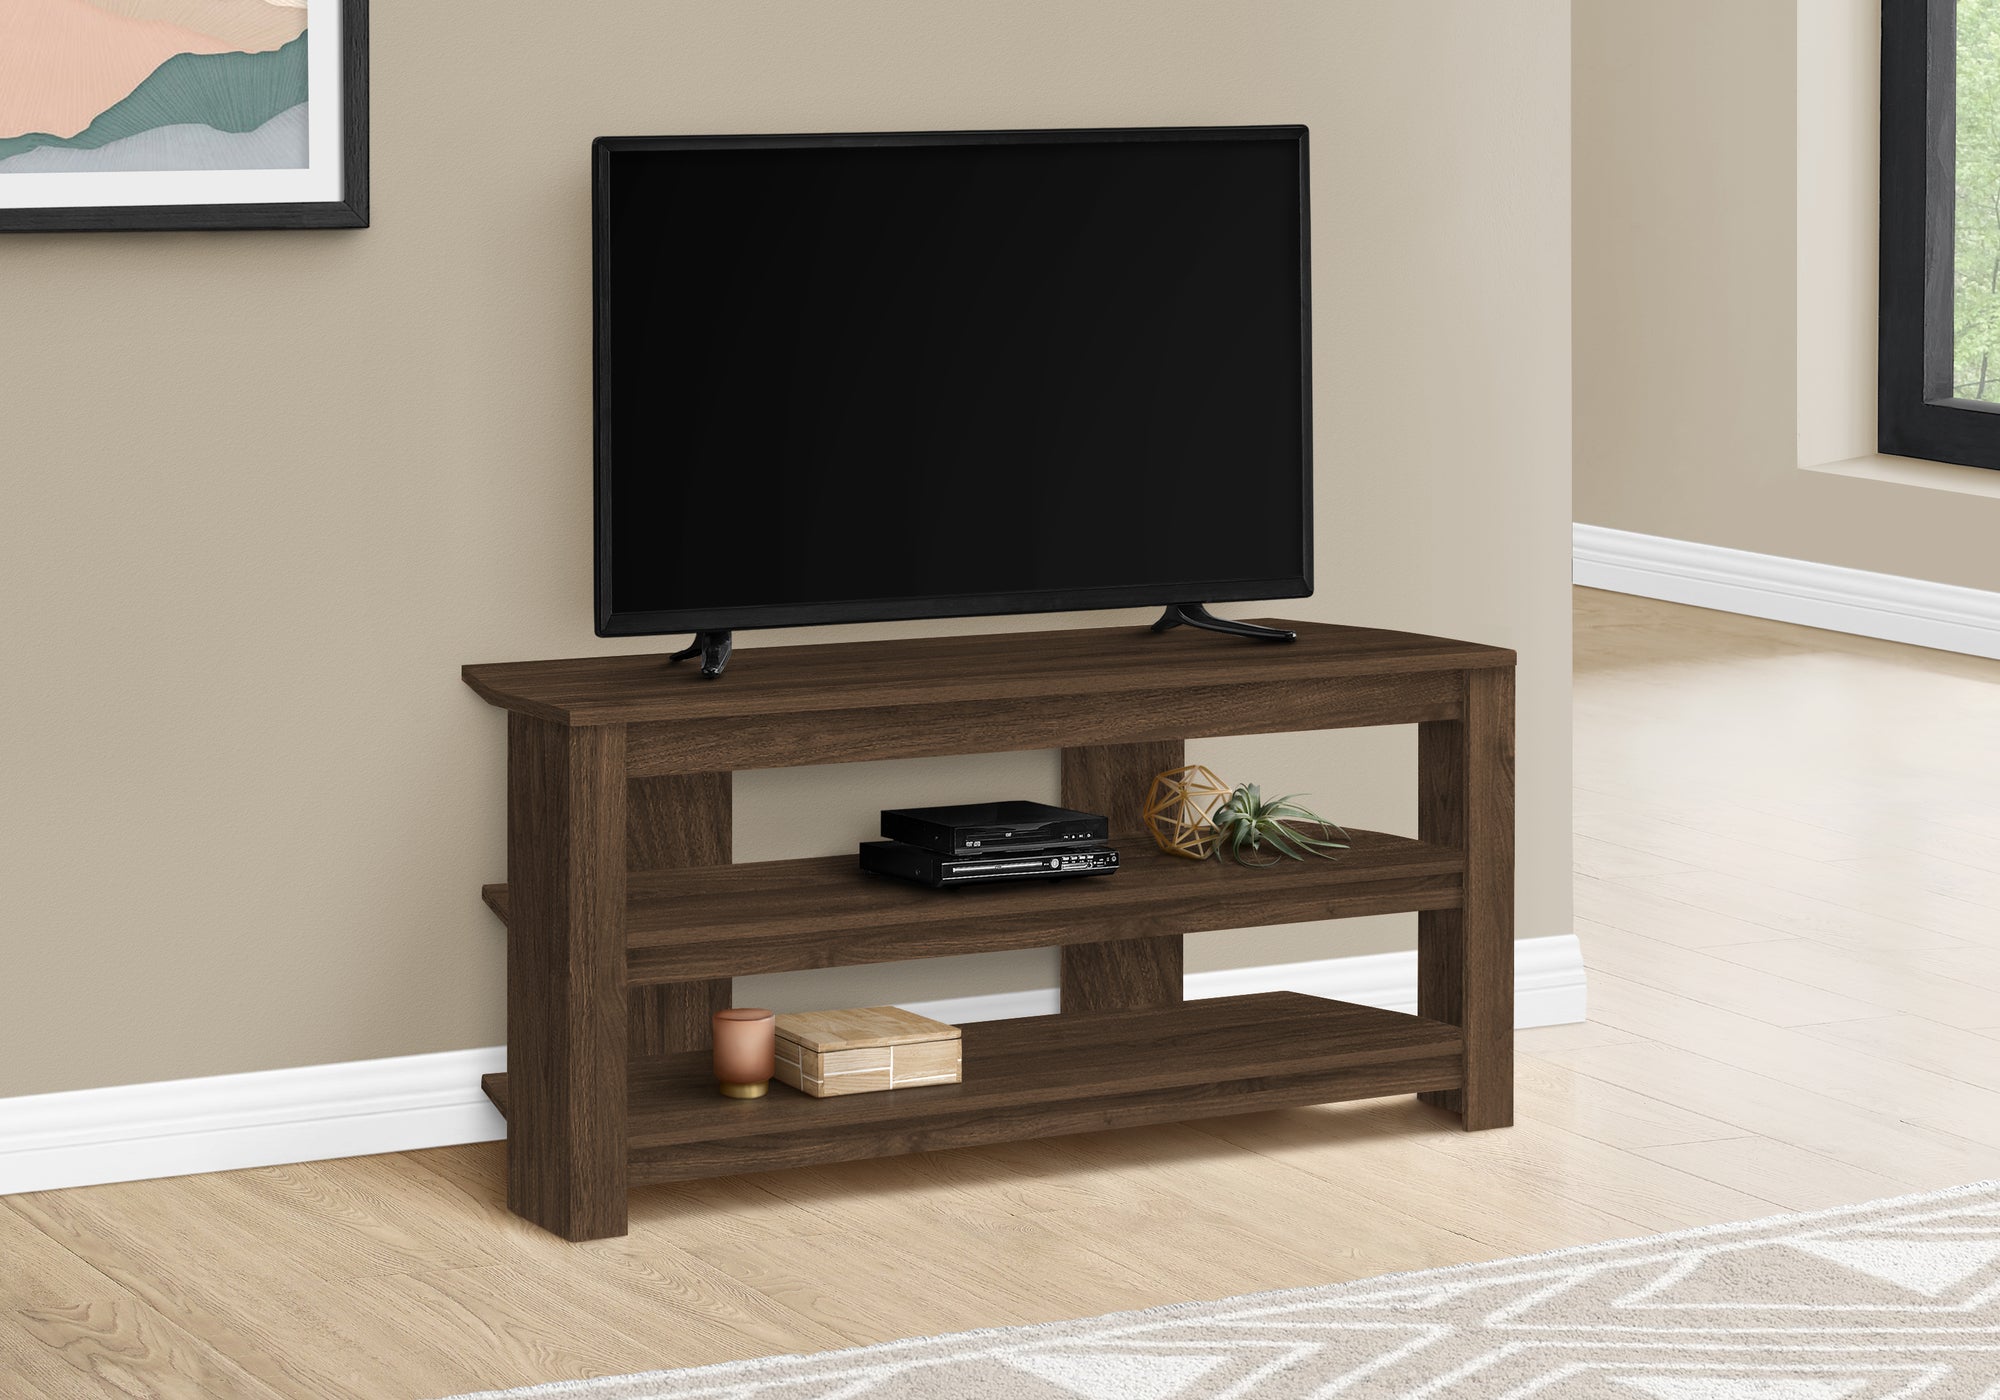 MN-502505    Tv Stand, 42 Inch, Console, Media Entertainment Center, Storage Cabinet, Living Room, Bedroom, Laminate, Walnut, Contemporary, Modern